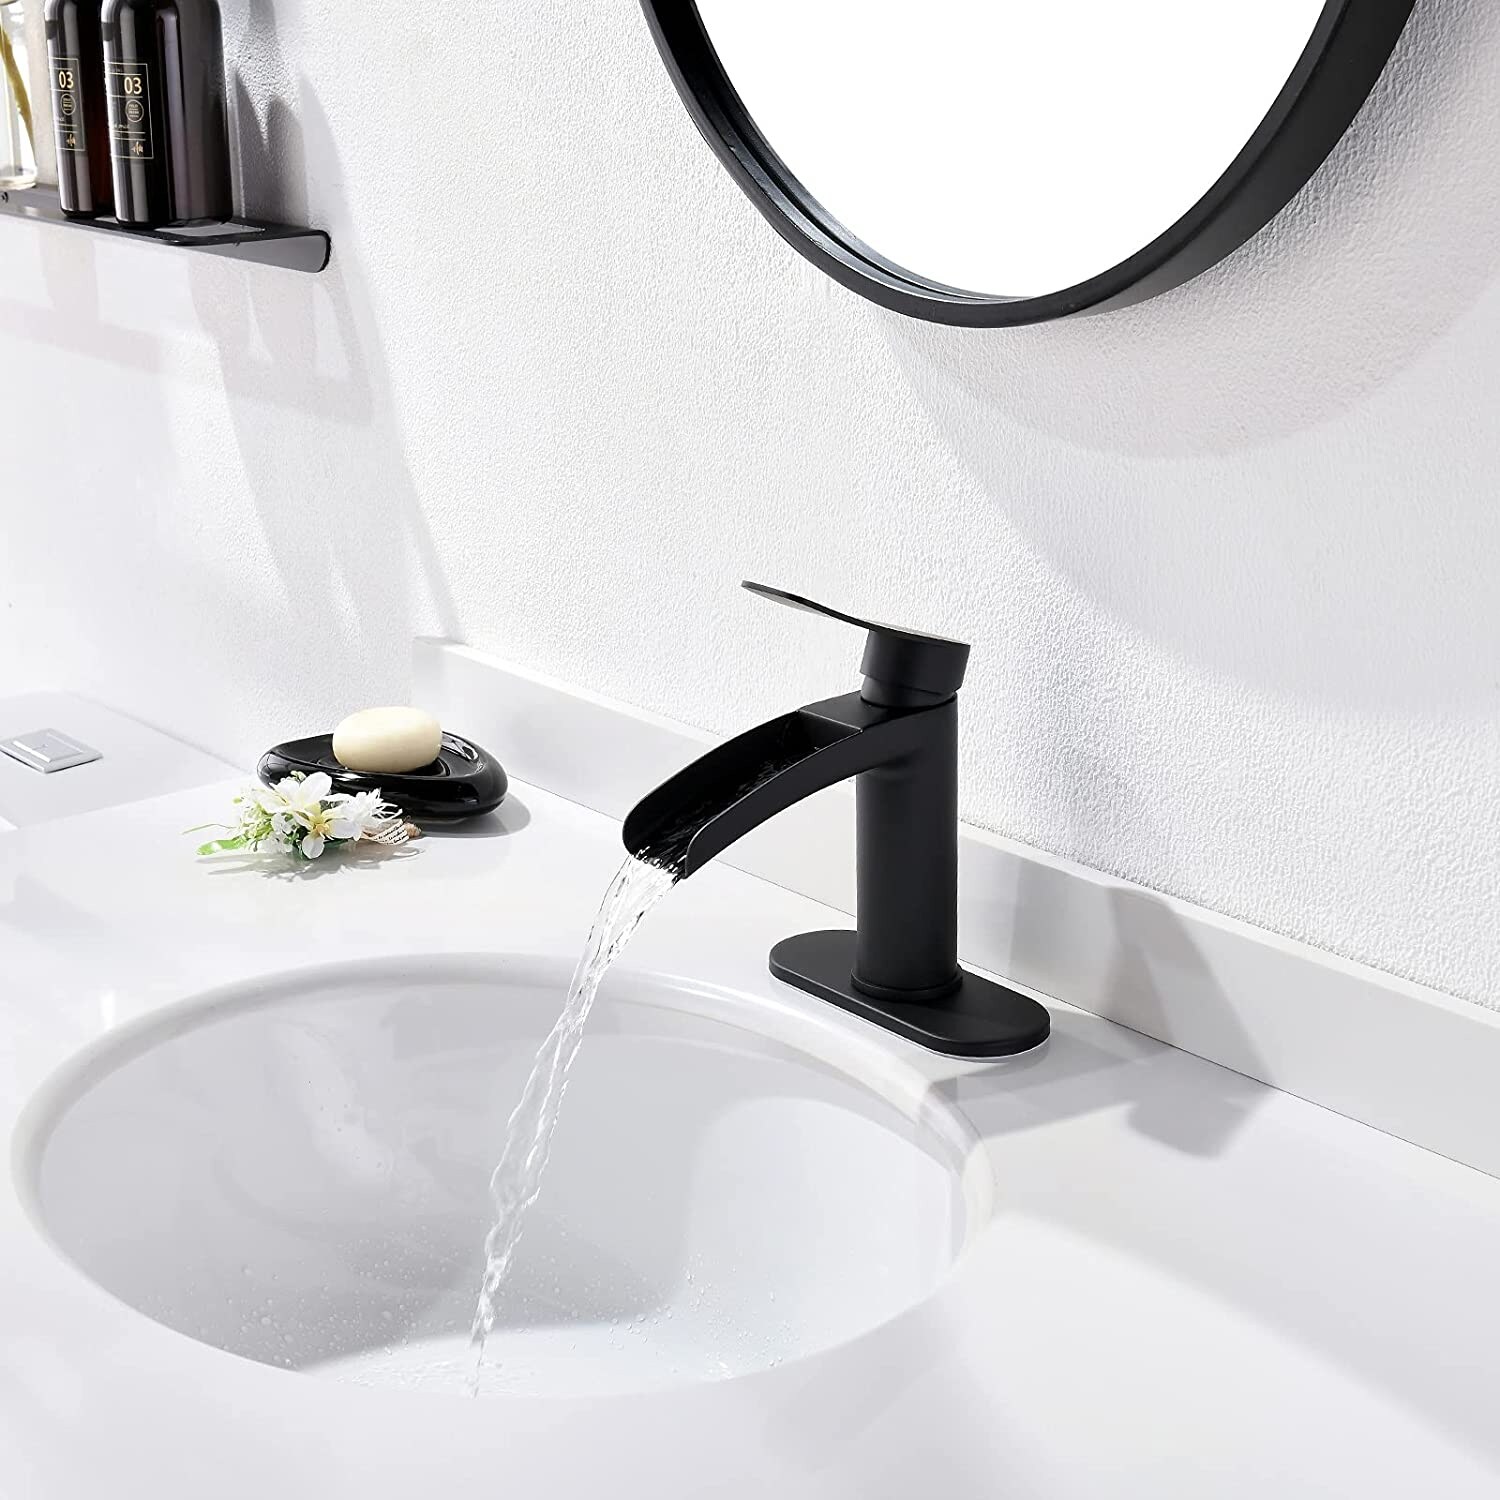 Waterfall Bathroom Sink Faucet Single Handle, with 4-Inch Deck Plate & Metal Pop Up Drain Assembly by phiestina